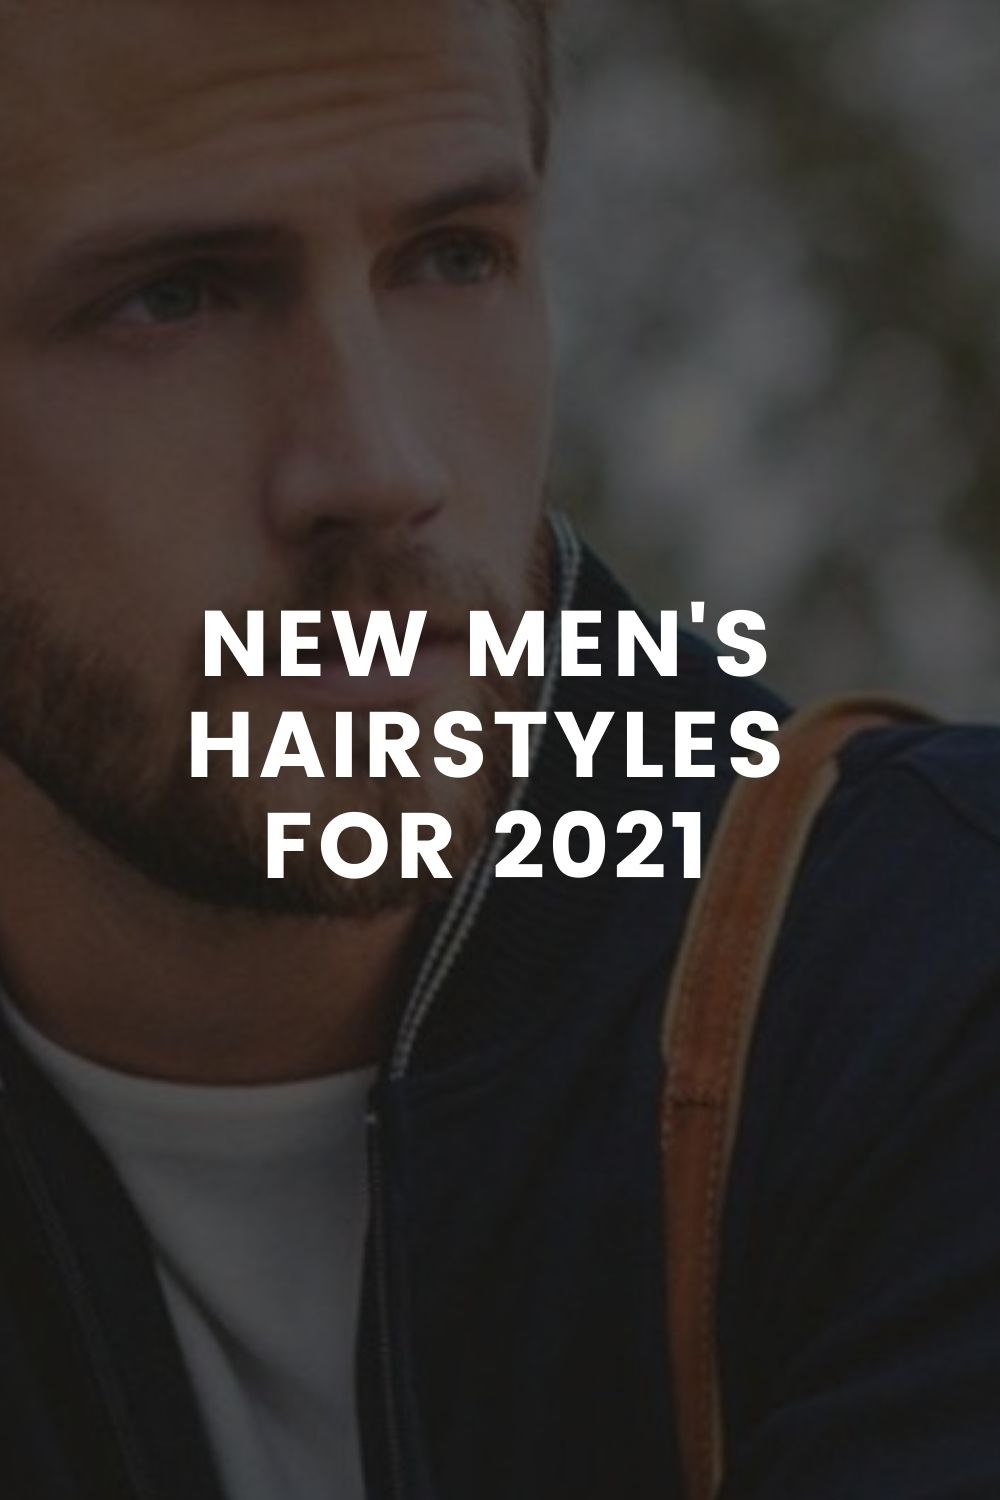 New Men's Hairstyles For 2021